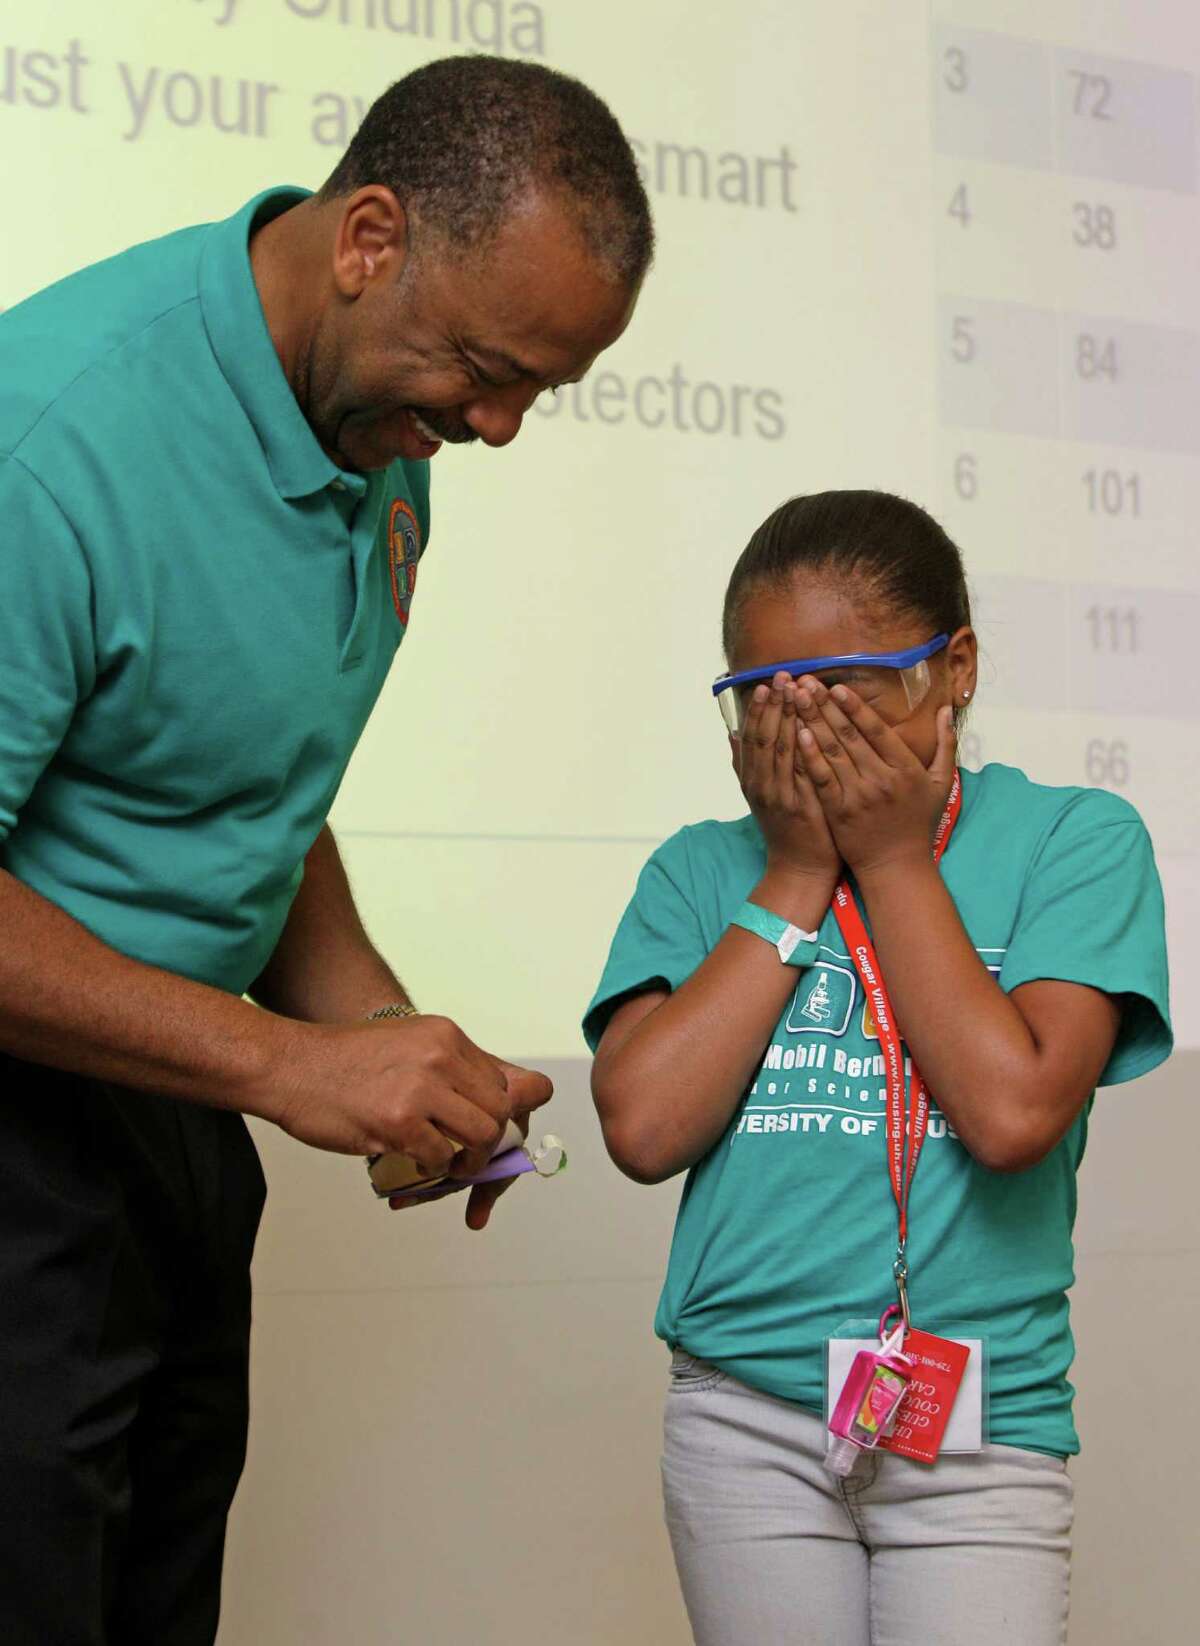 Ramani Talley, 12, right, of team Awesome cannot bare to watch as former astronaut Dr. Bernard A. Harris Jr. counts the layer of impact on her team's entry for the "Space Suit Challenge."